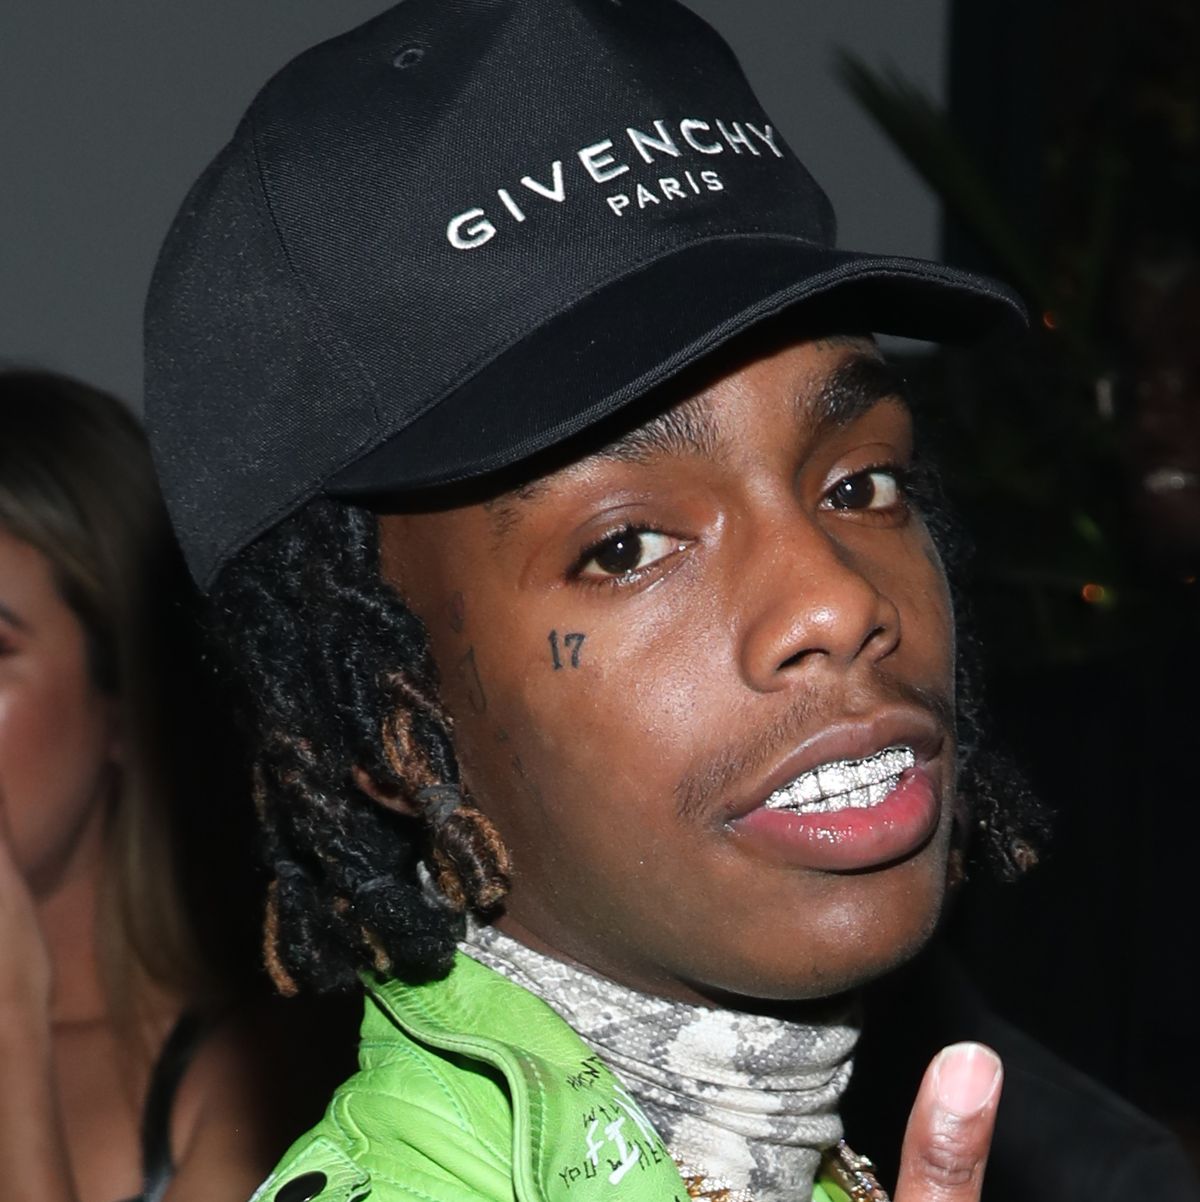 Ynw Melly Releases New Album While Awaiting Murder Trial